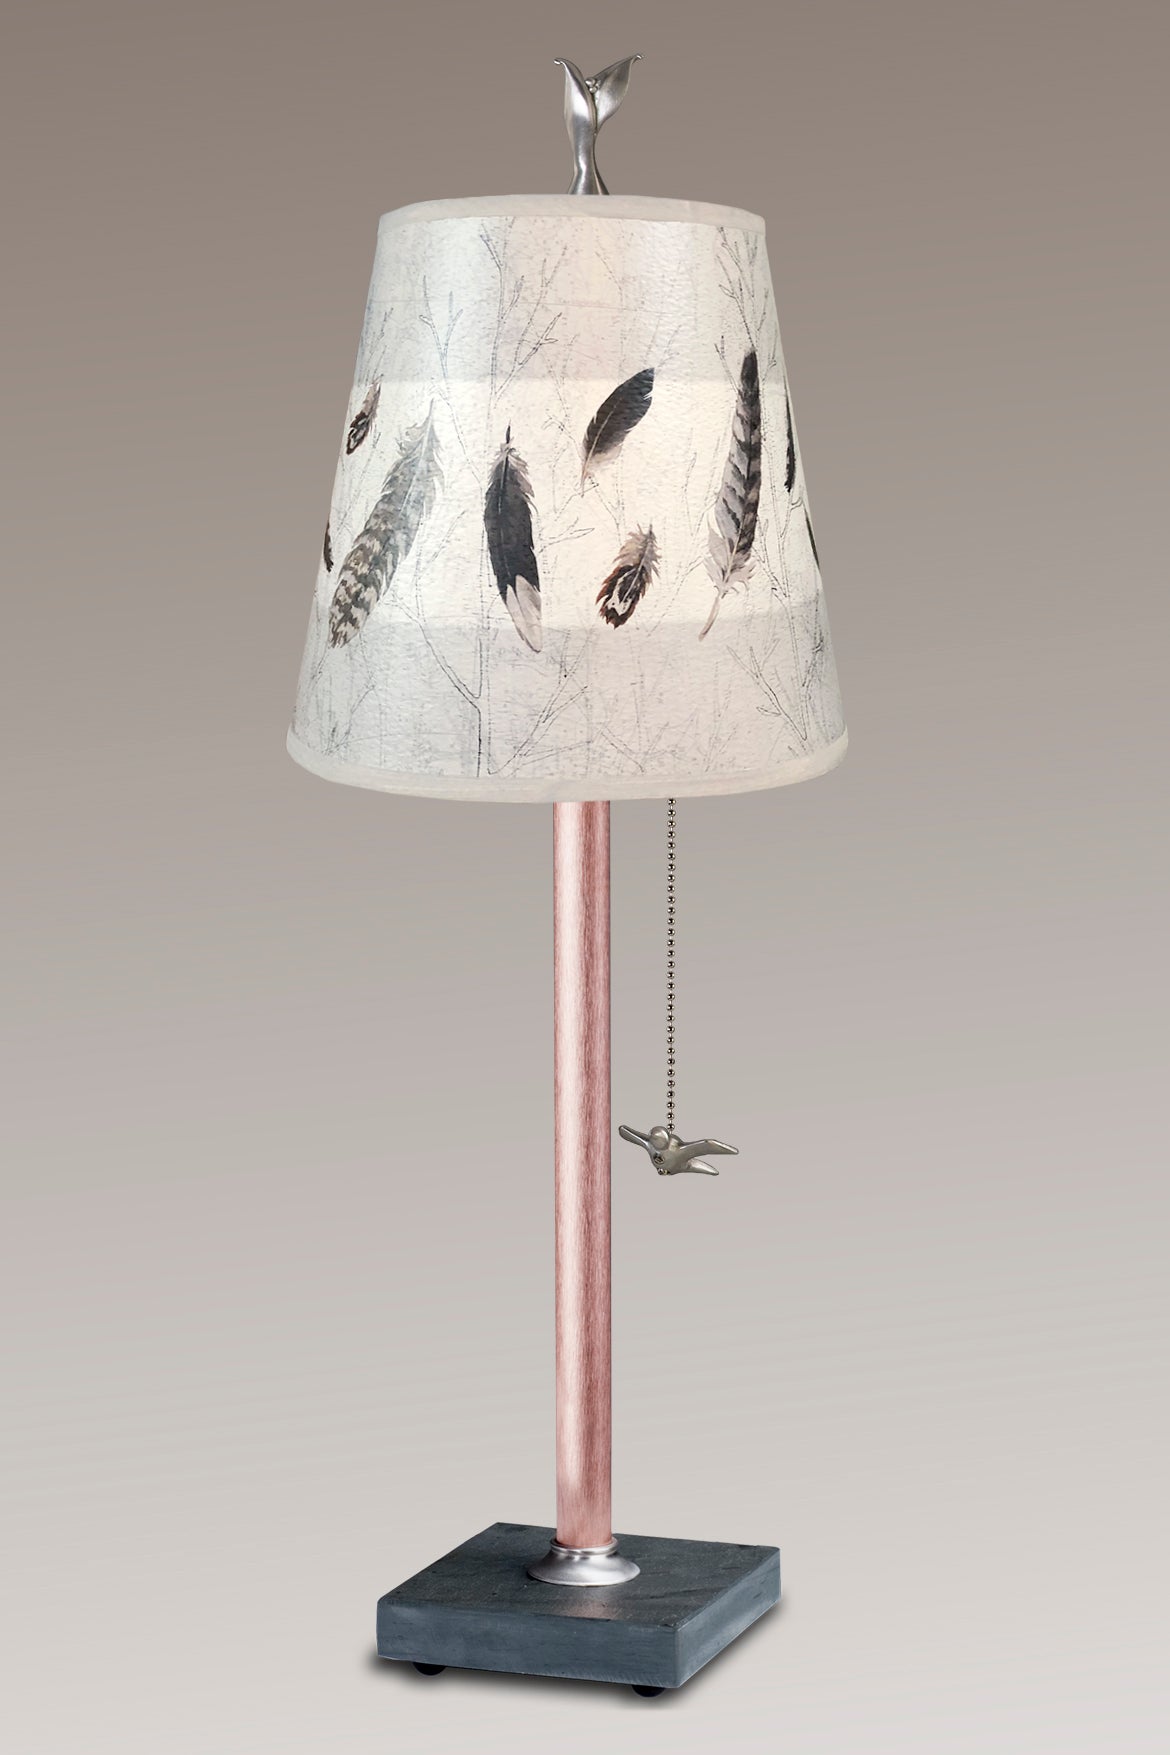 Copper Table Lamp with Small Drum in Feathers in Pebble